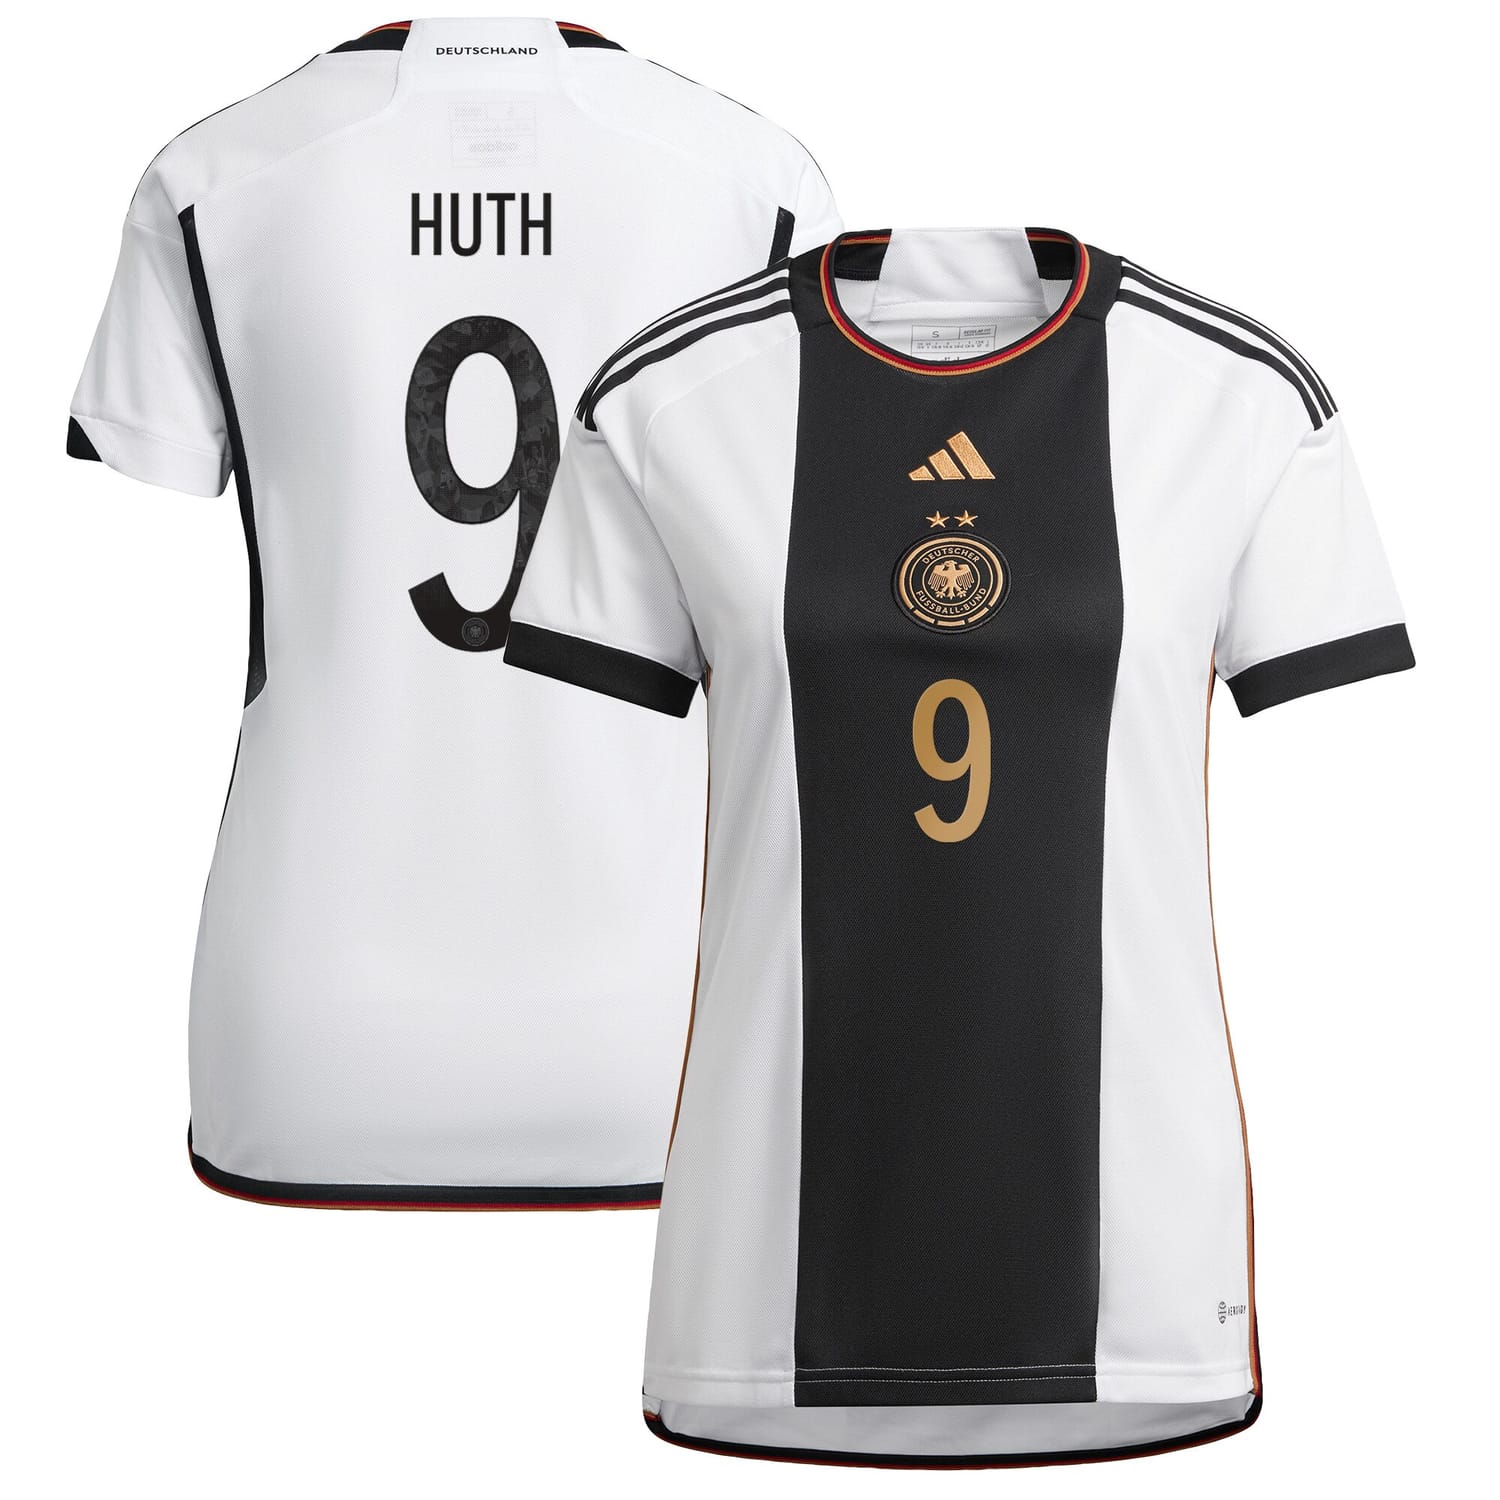 Germany National Team Home Jersey Shirt player Svenja Huth 9 printing for Women